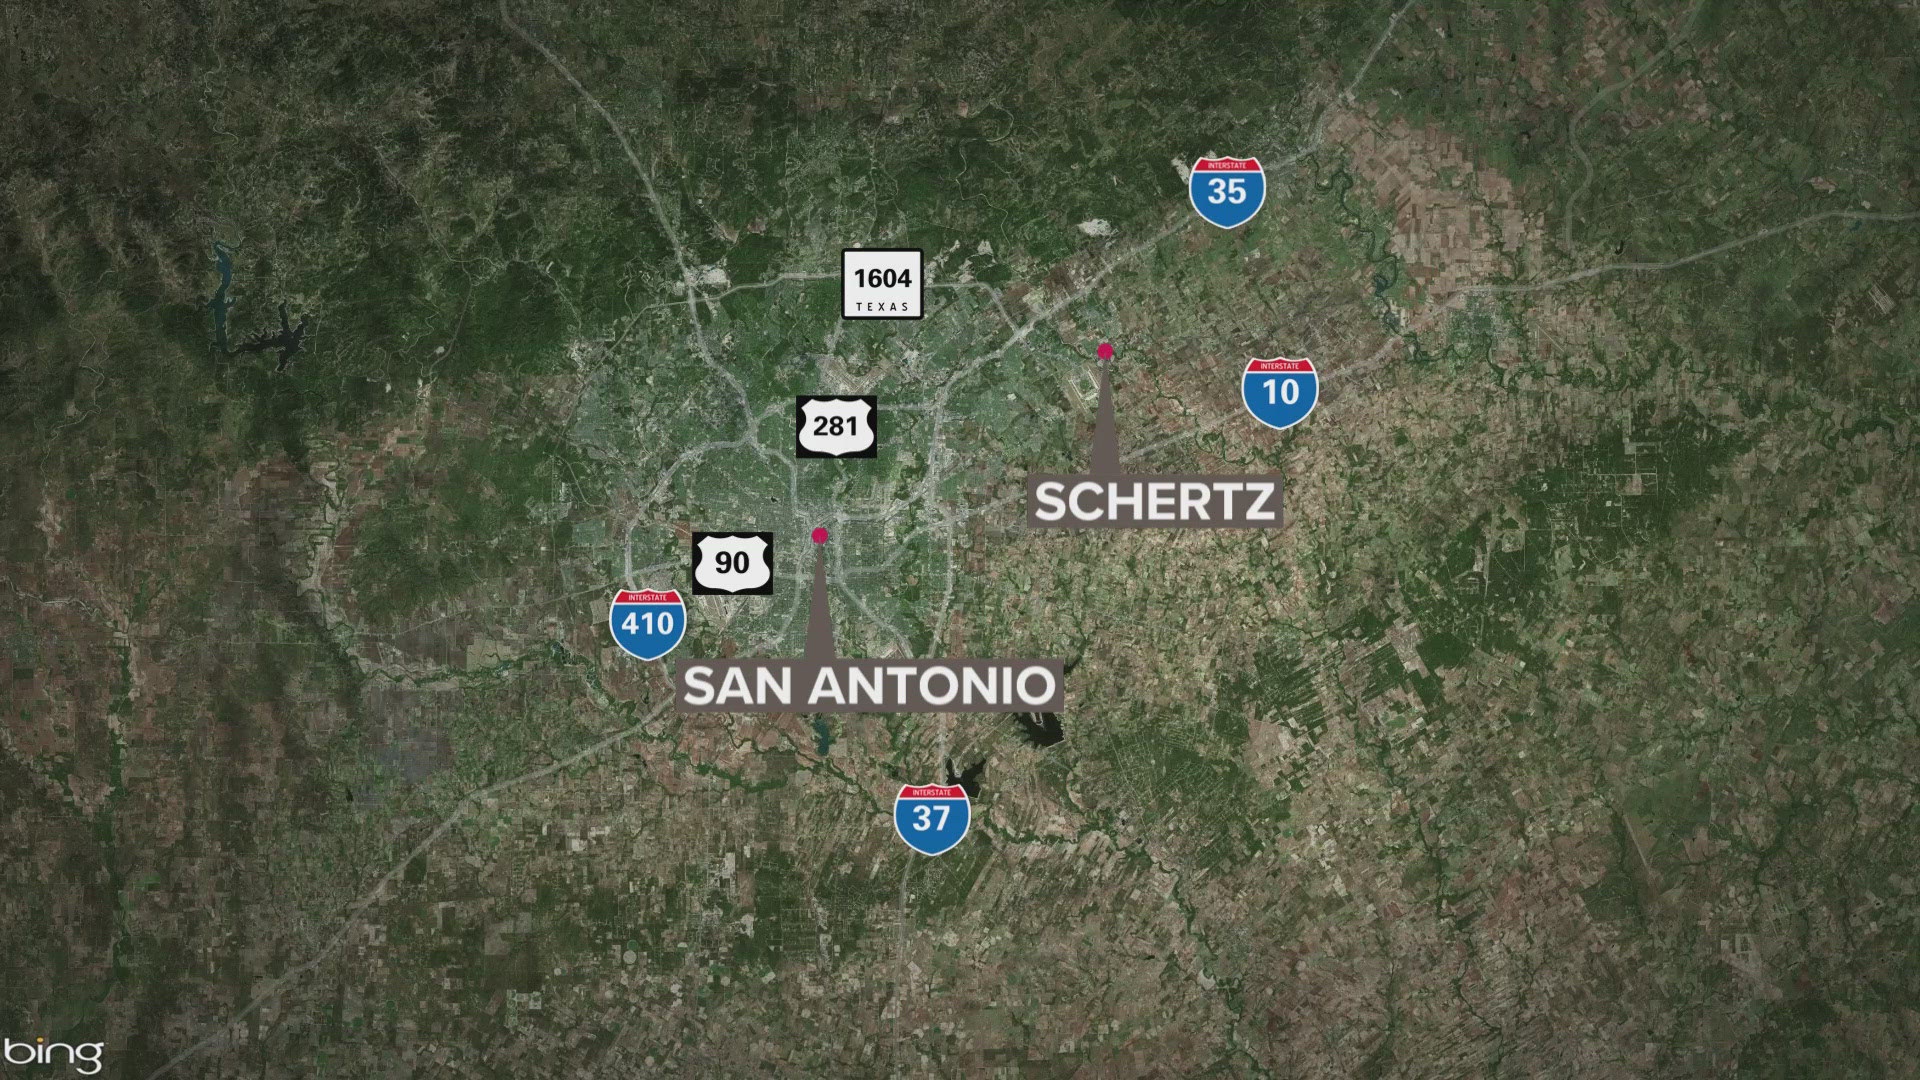 For the second time in one week, a Schertz student has been arrested for bringing a gun on school grounds.